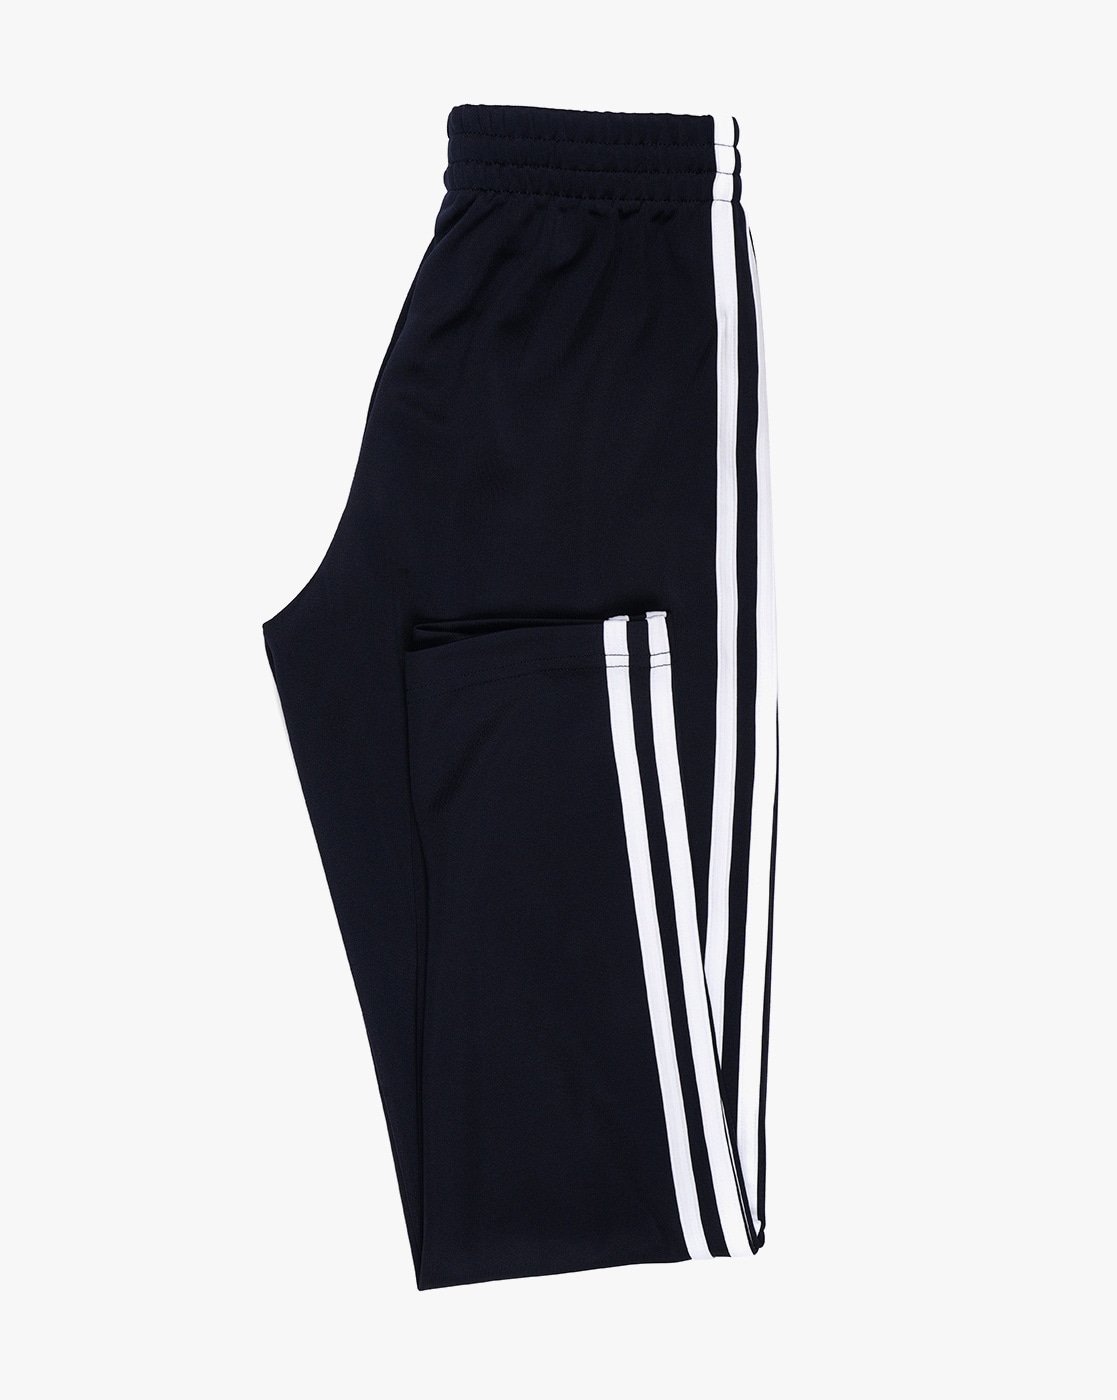 Buy ADIDAS Printed Polyester Regular Fit Boys Trousers  Shoppers Stop